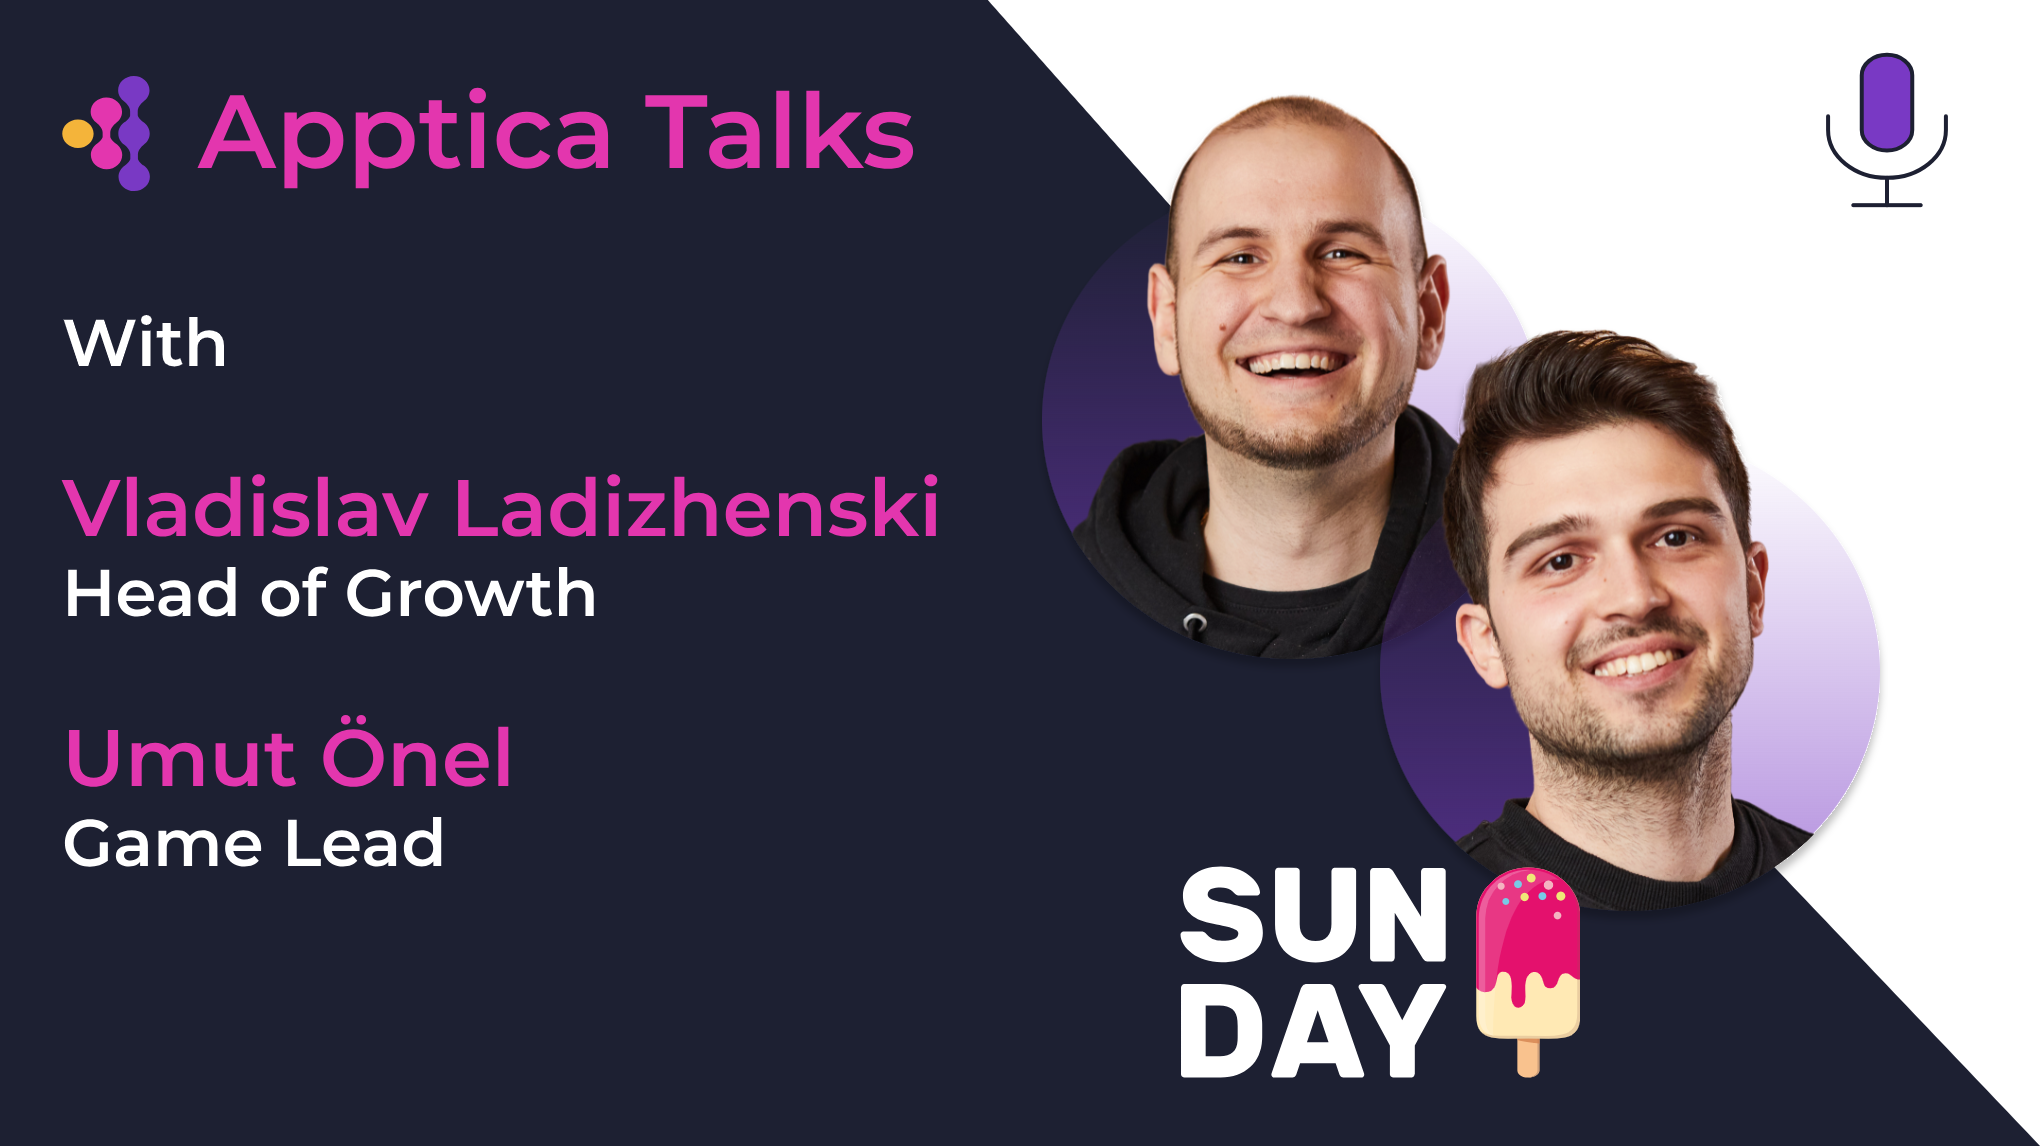 Apptica Talks. Episode #3. Ideation, testing and scaling of hypercasual games with Vladislav Ladizhenski and Umut Önel from Sunday